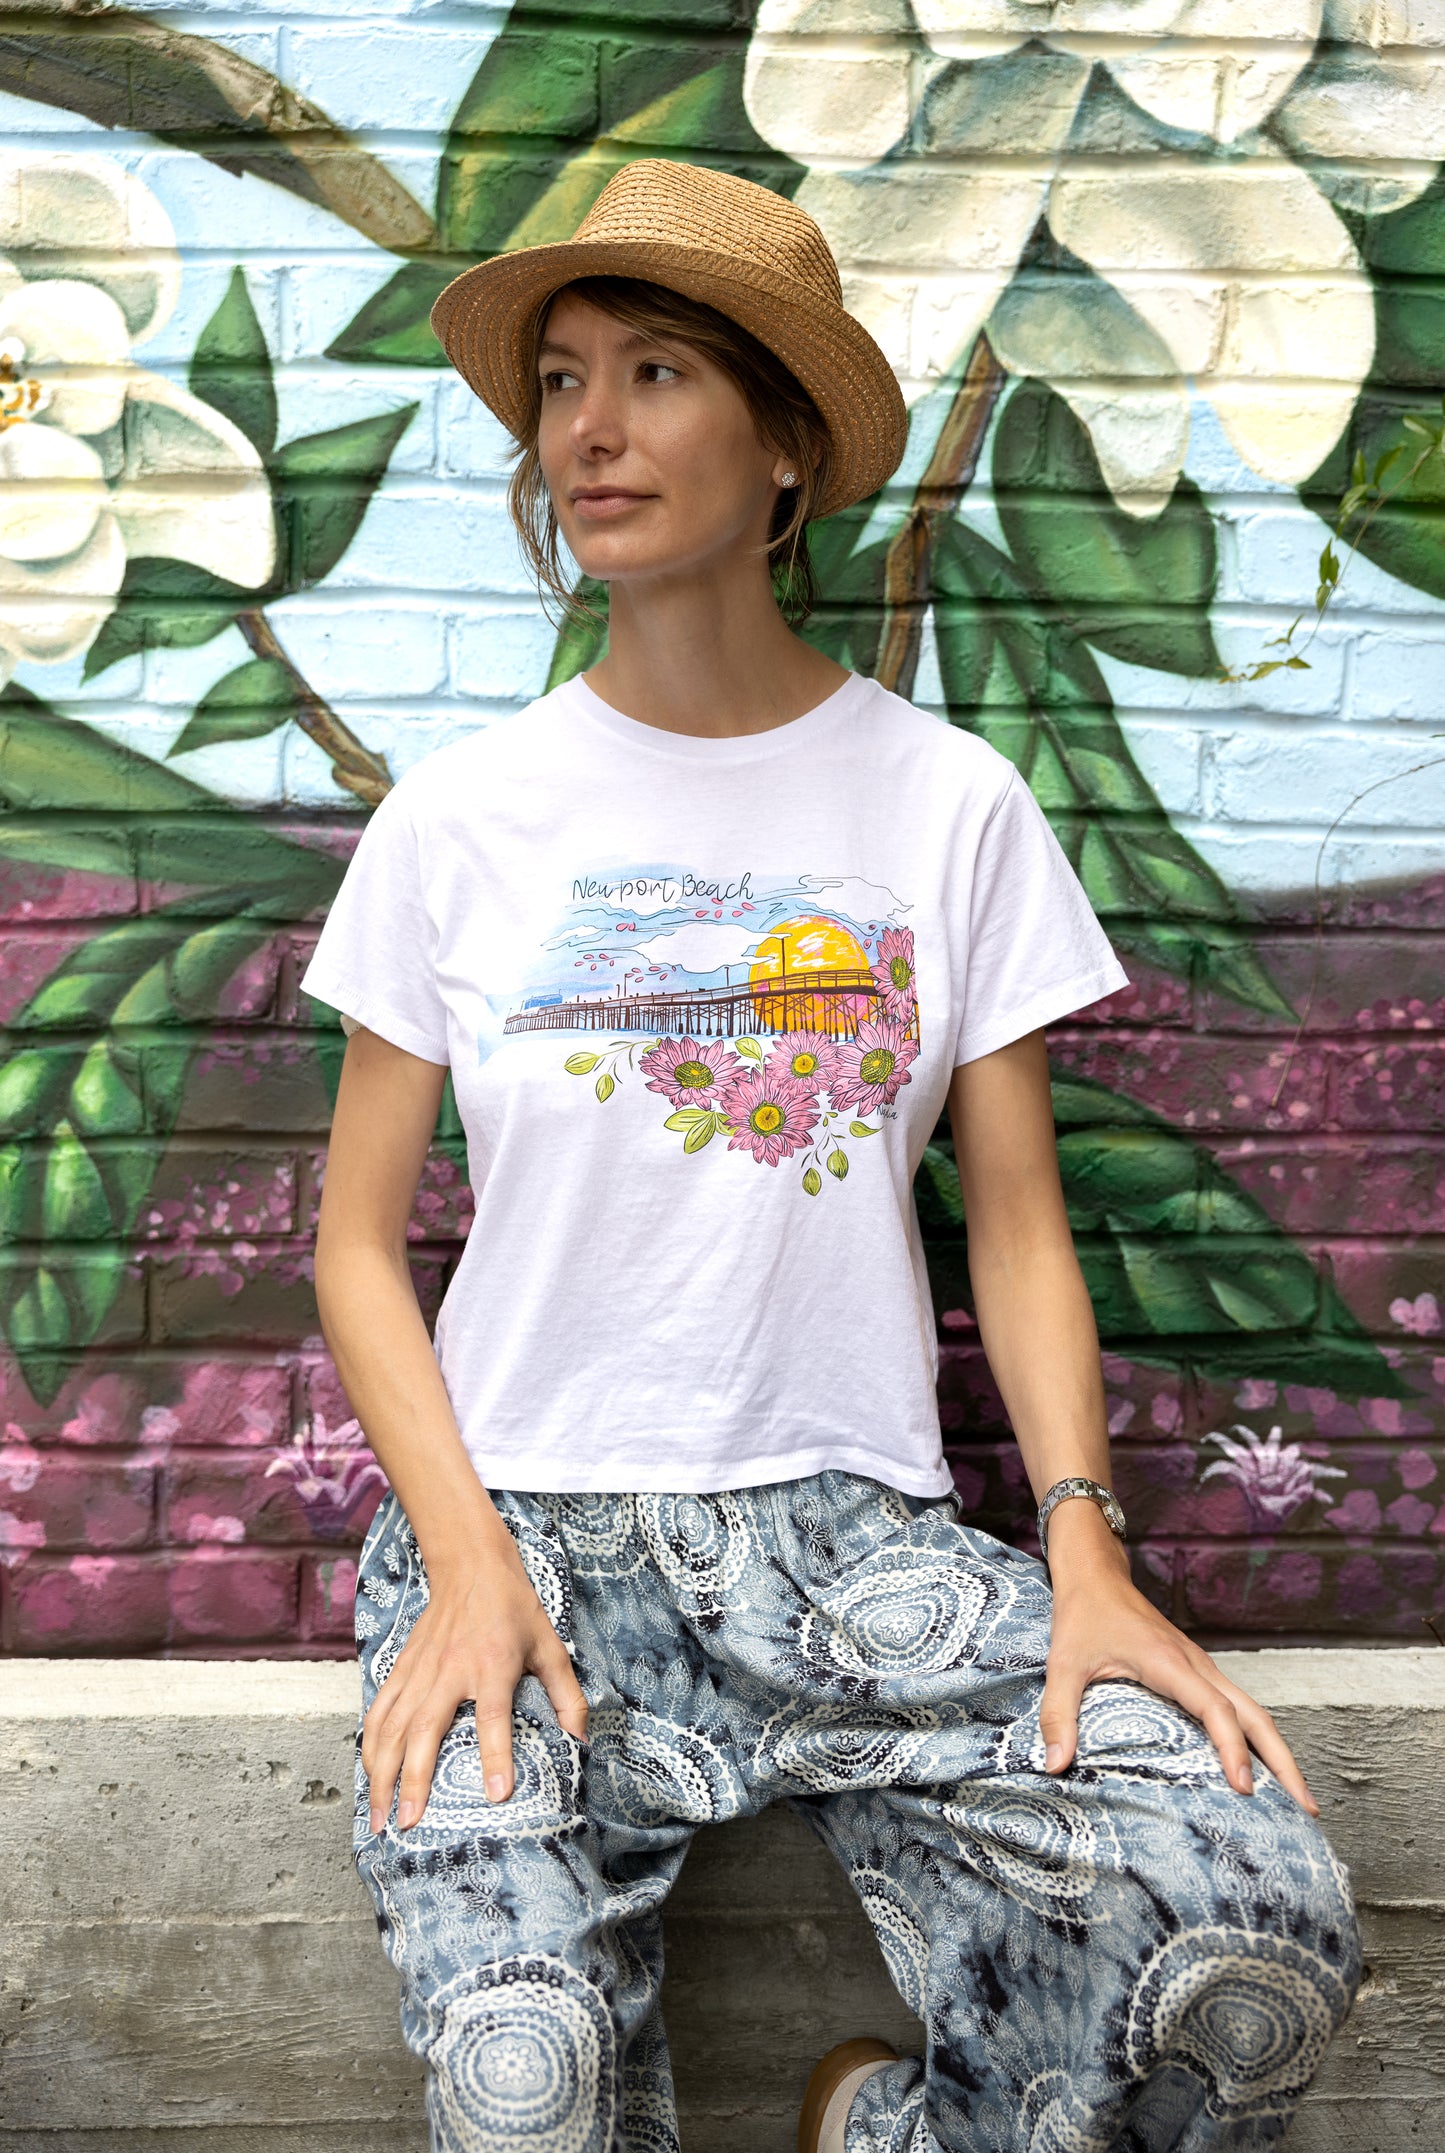 Floral illustration of Newport beach Pier graphic tee by Nadia Watts